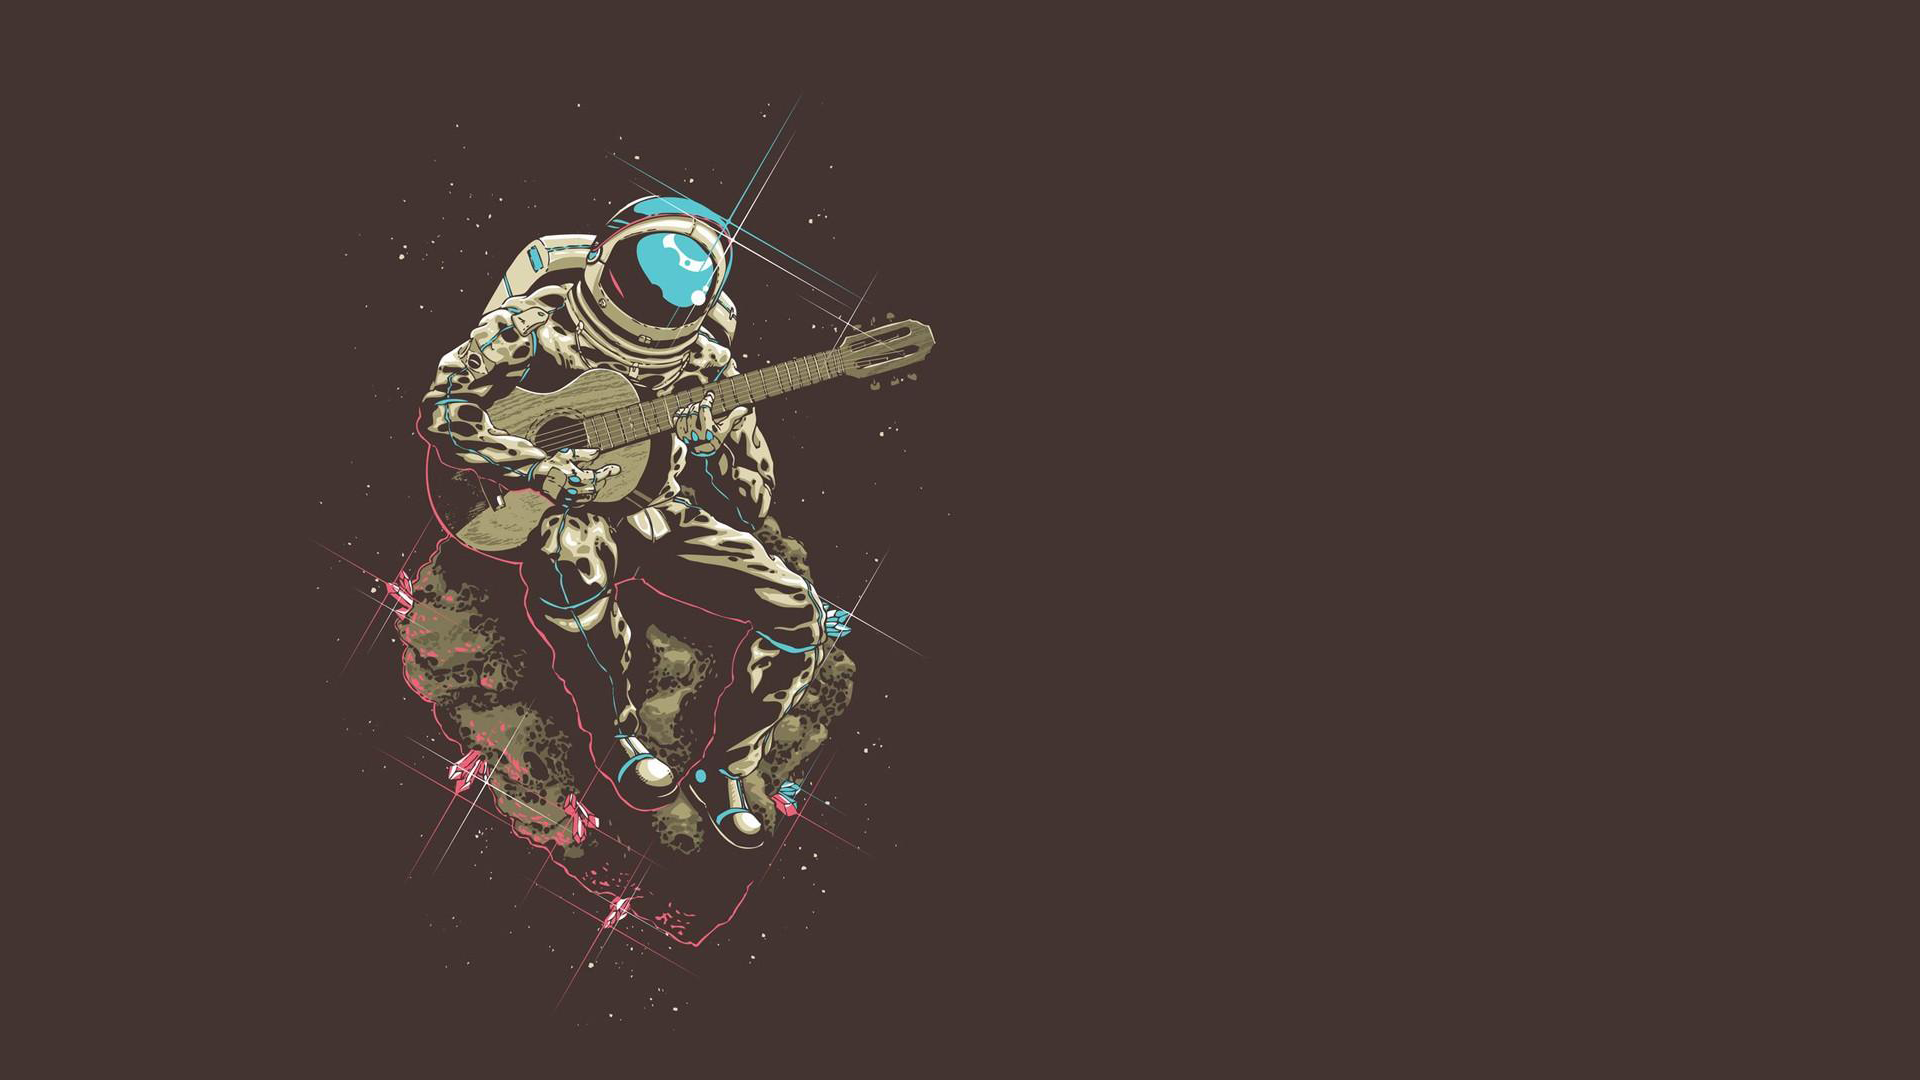 General 1920x1080 minimalism space guitar astronaut asteroid musical instrument simple background artwork music